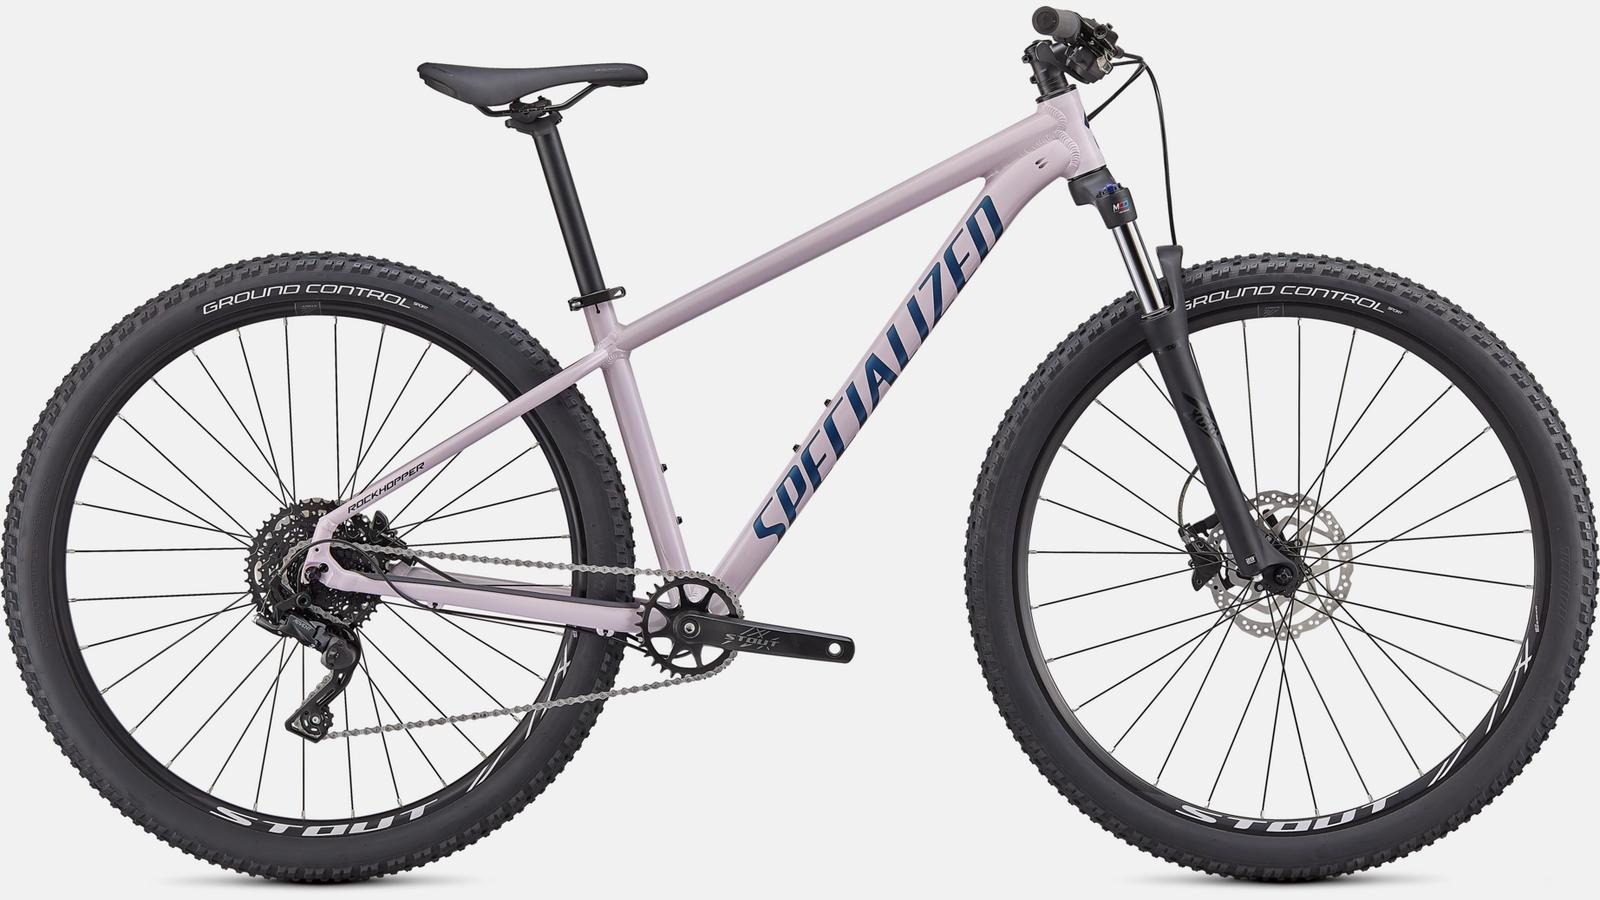 Paint for 2021 Specialized Rockhopper Comp - Gloss Clay